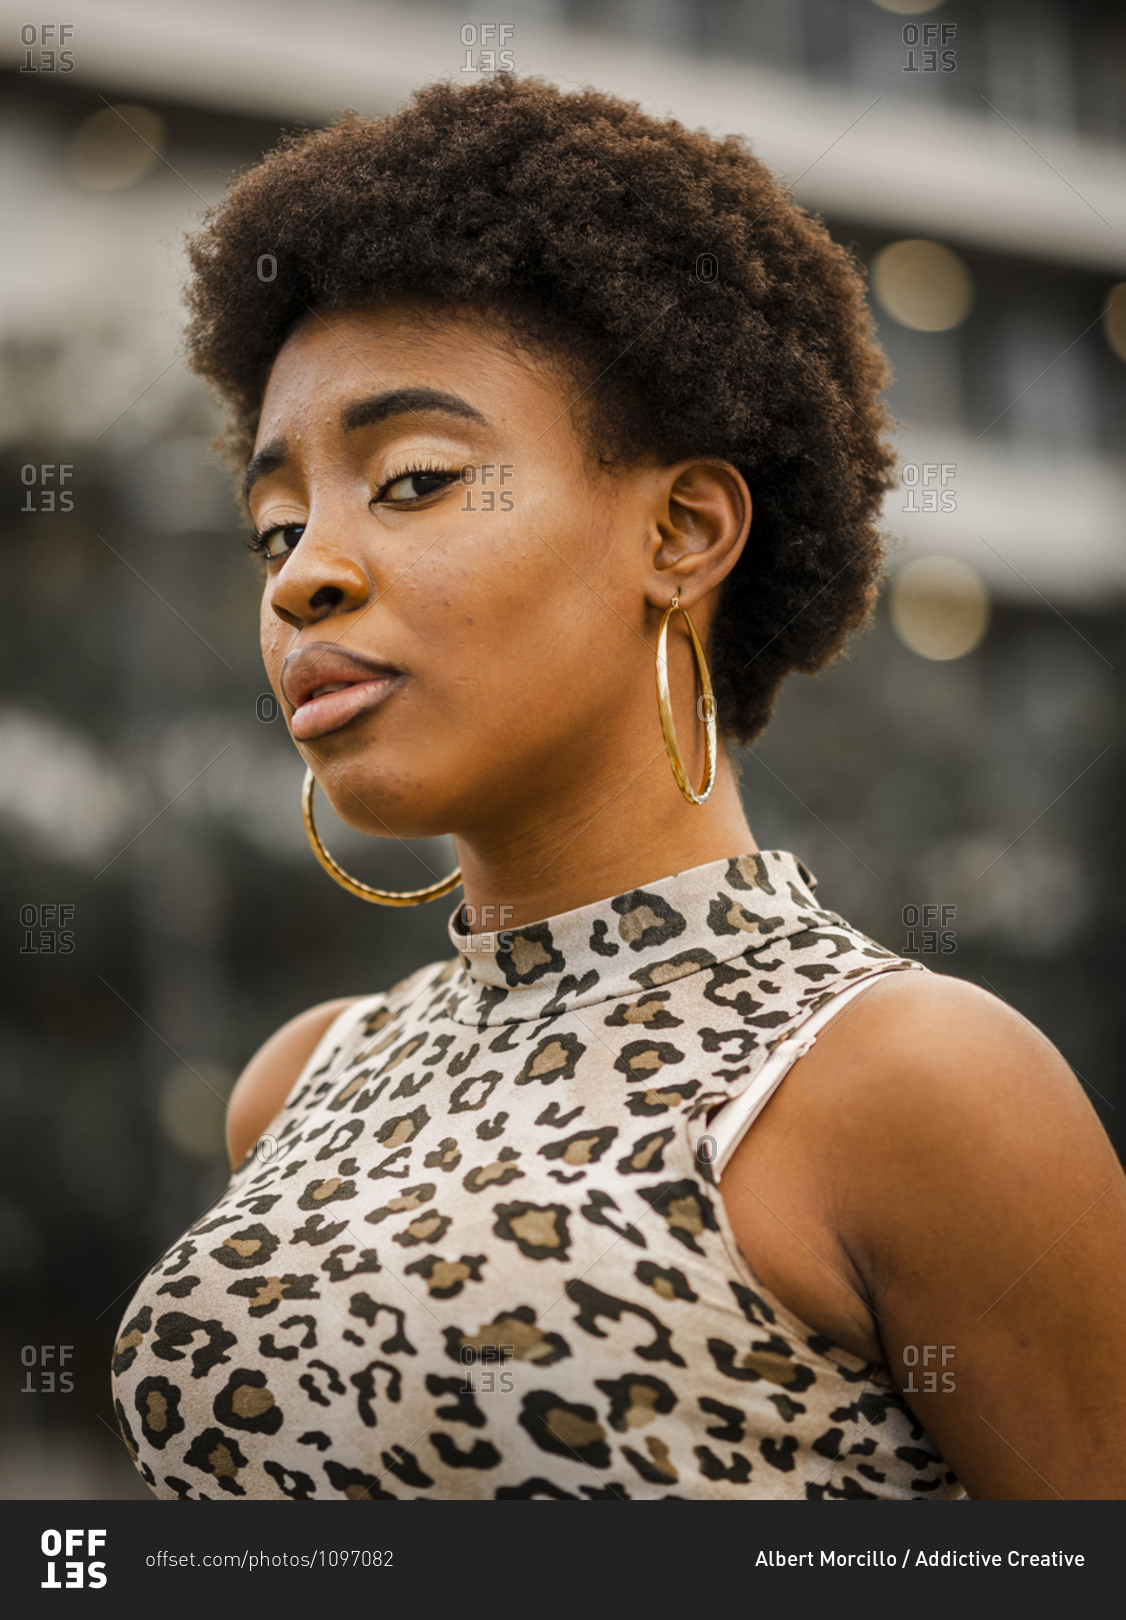 Low angle of confident stylish young African American female with curly hair dressed in jeans and crop top with animal print looking at camera while standing on urban street